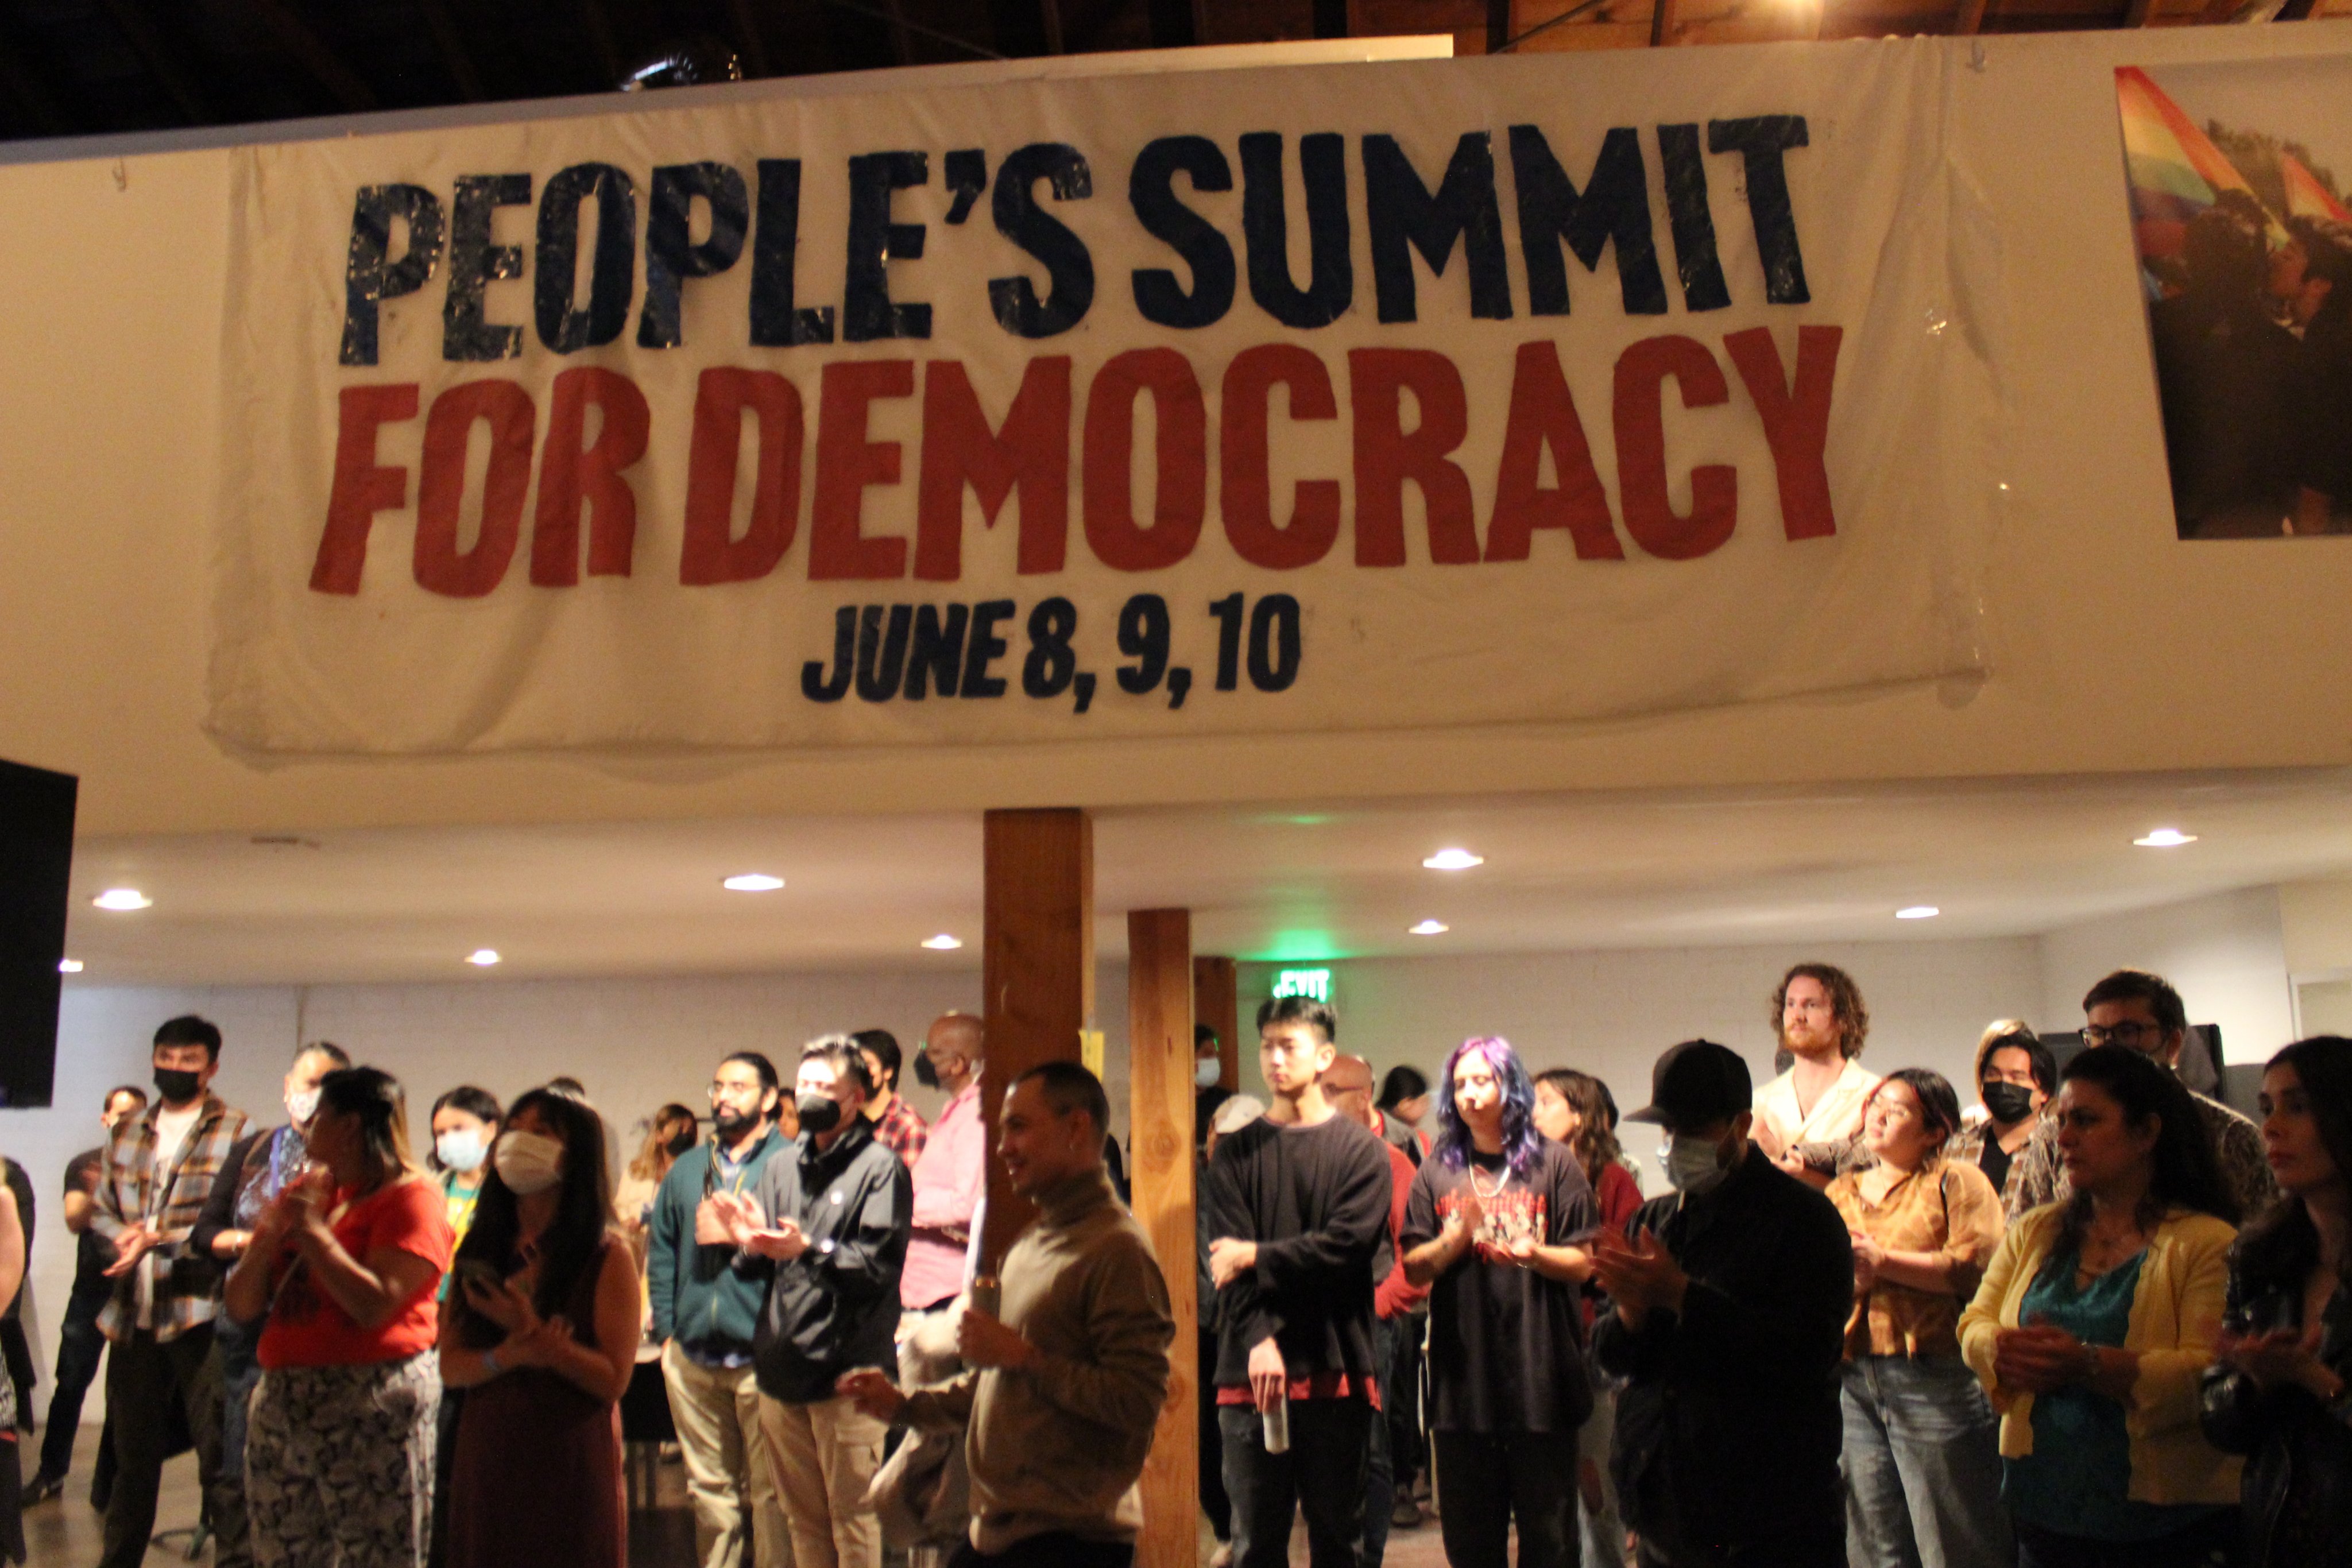 The People’s Summit for Democracy Offers a Progressive Vision to Counter U.S. Dominance in the Region